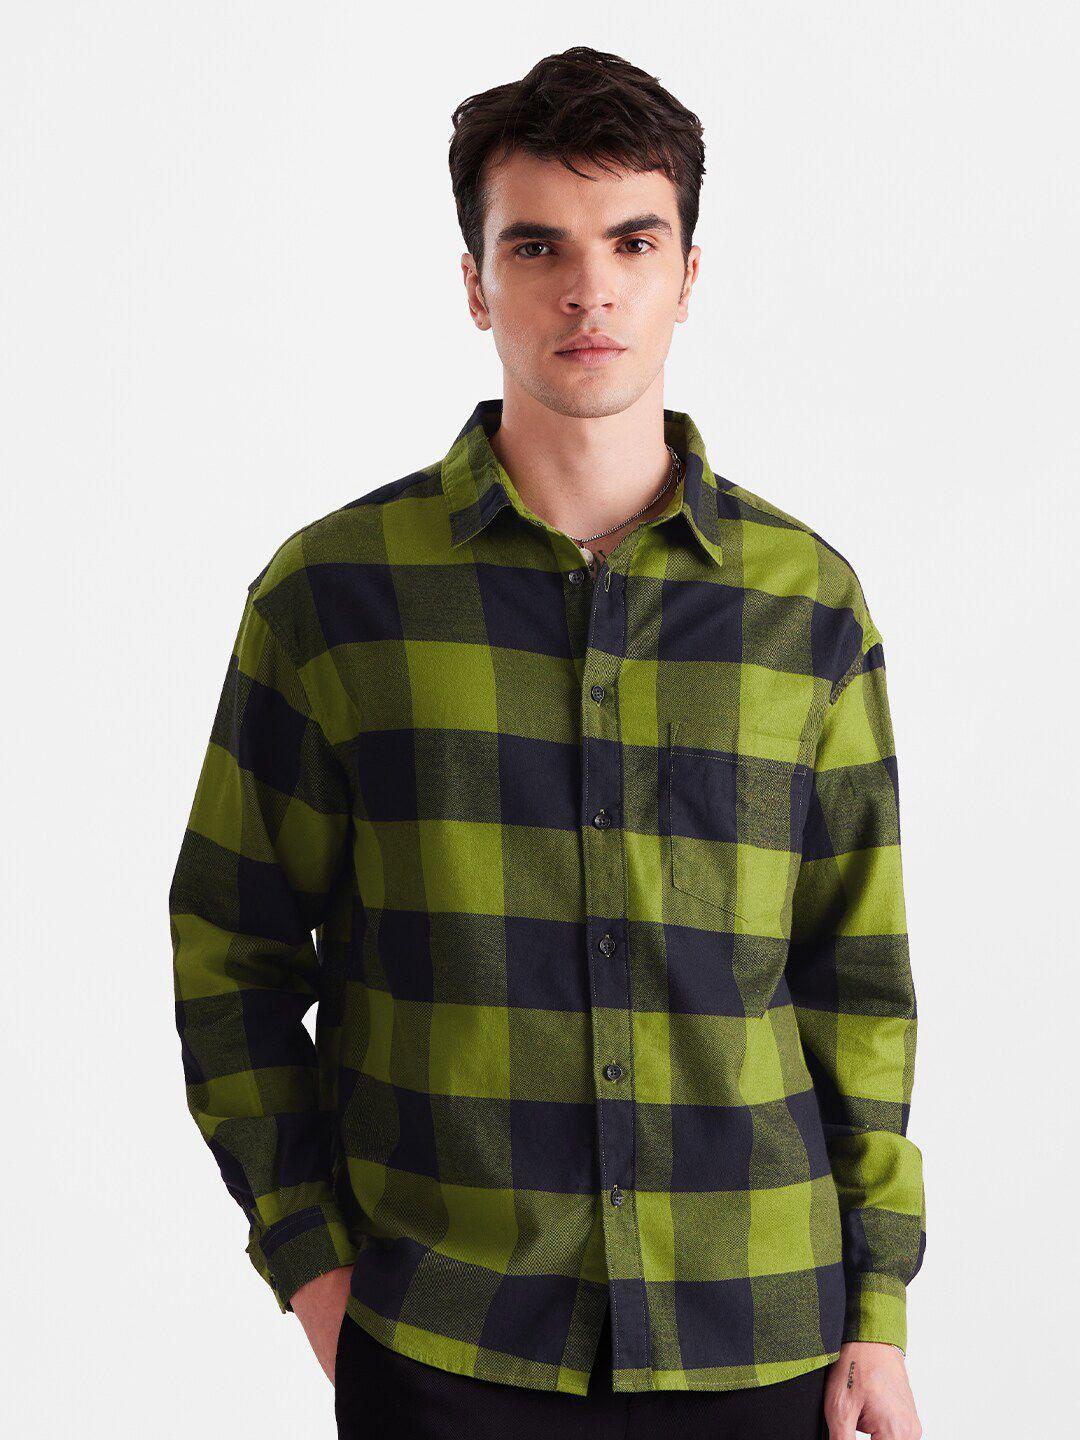 the-souled-store-green-buffalo-checked-spread-collar-pure-cotton-casual-shirt